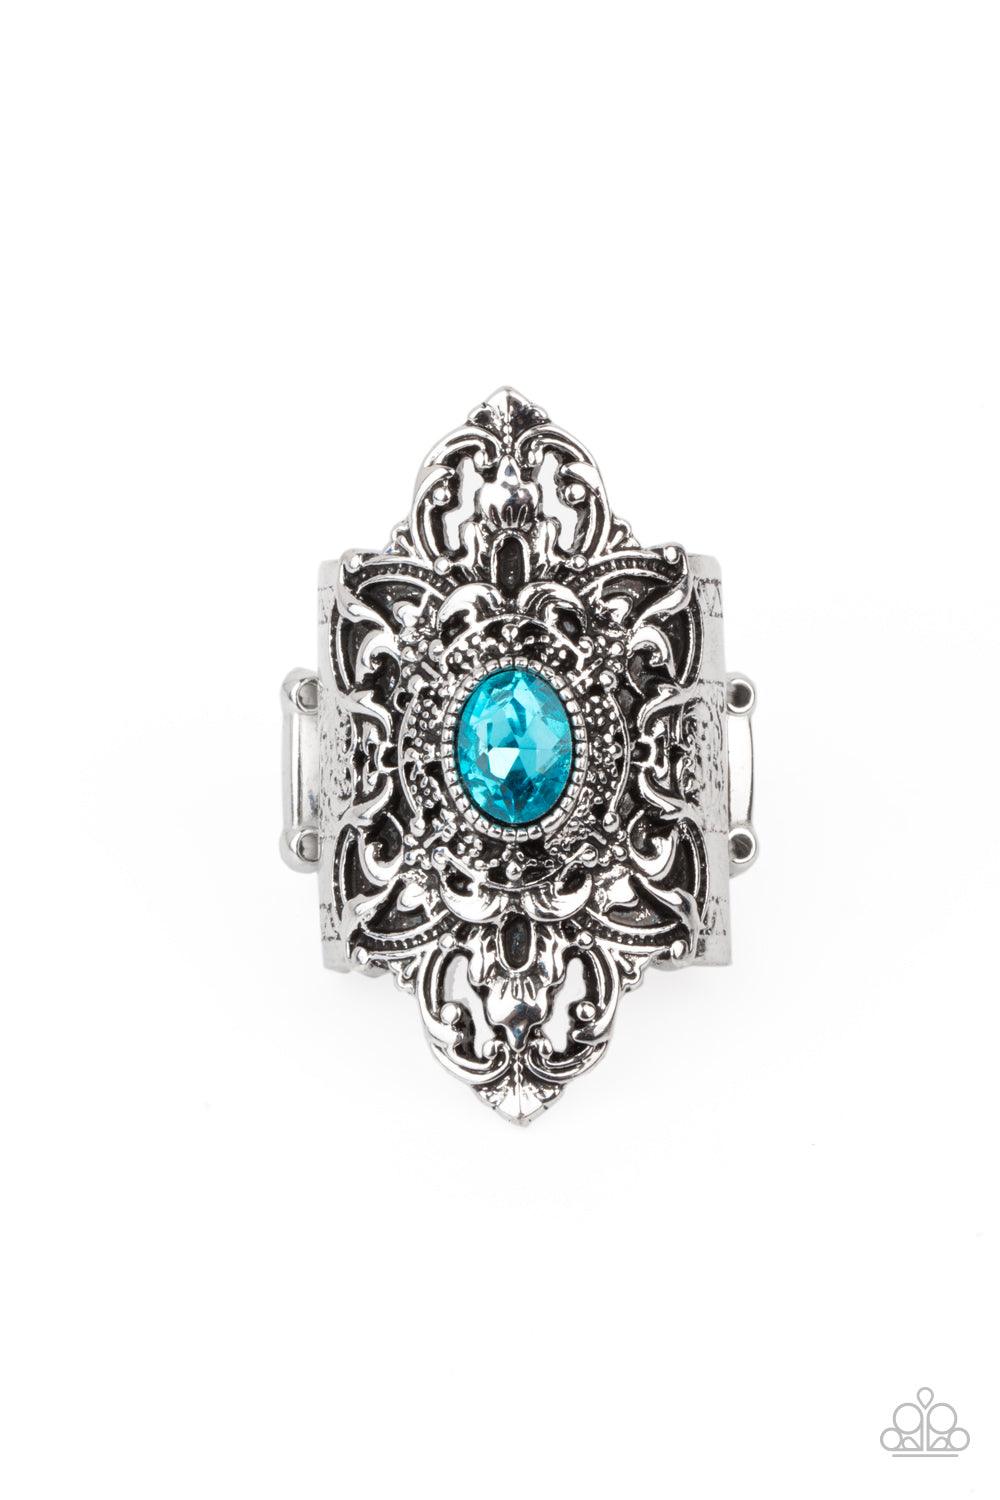 Paparazzi Accessories Perennial Posh - Blue A glittery blue rhinestone adorns the center of a scalloped silver frame that is embossed in a rustic floral backdrop, creating a leafy centerpiece atop the finger. Features a stretchy band for a flexible fit. S